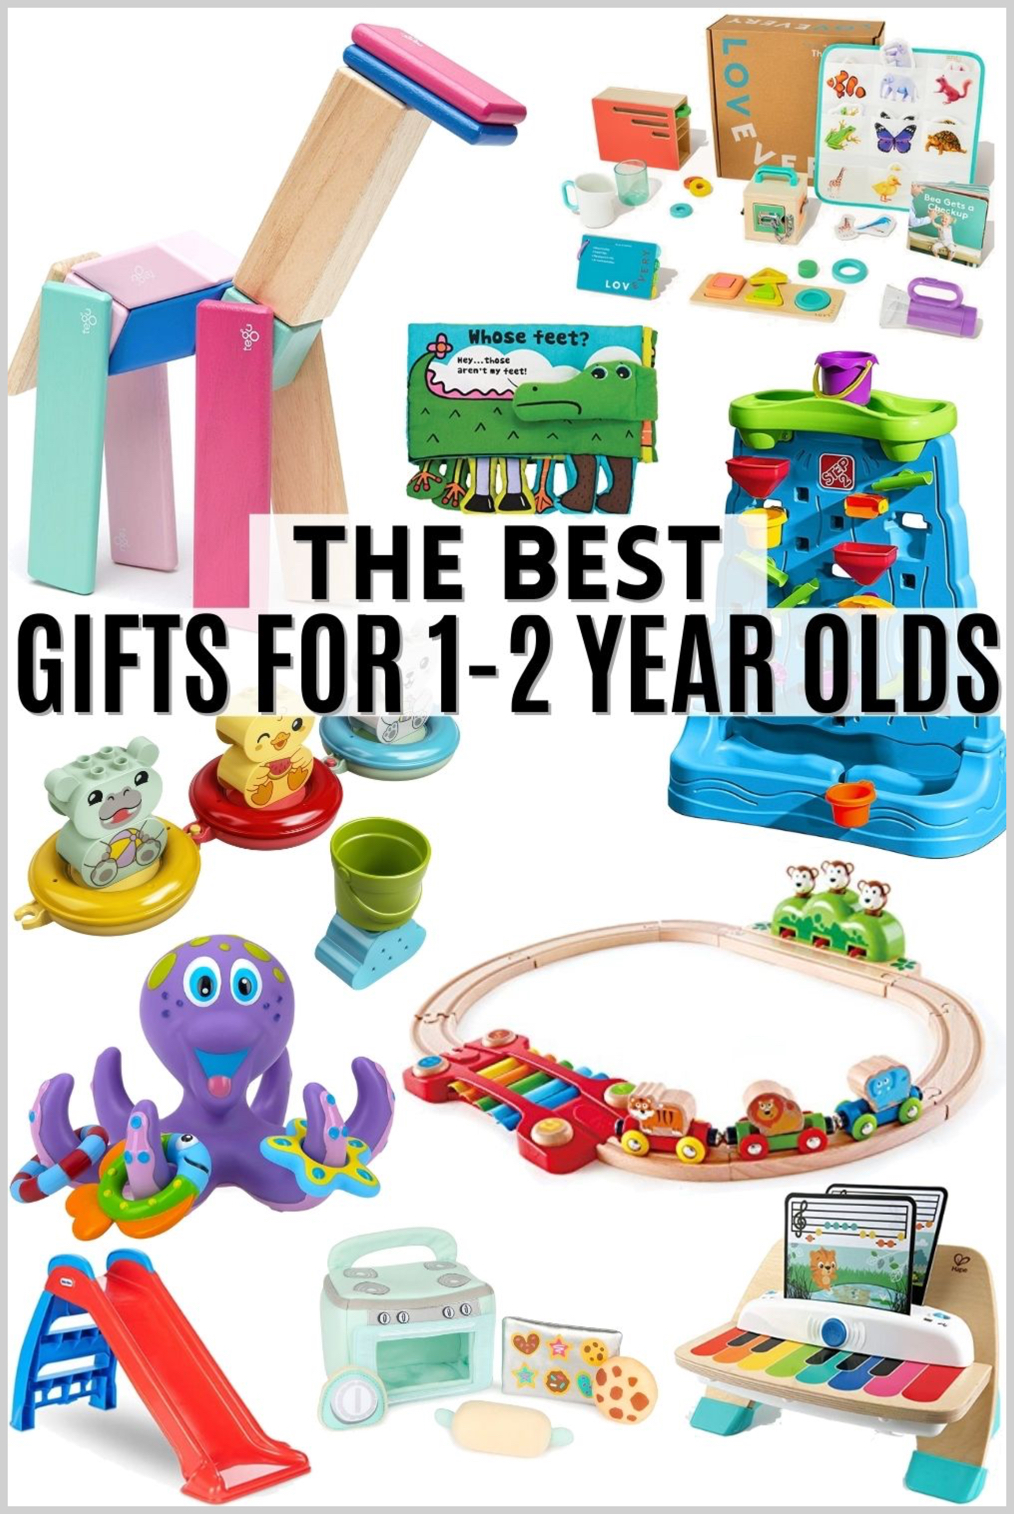 gifts for 1-2 year olds 